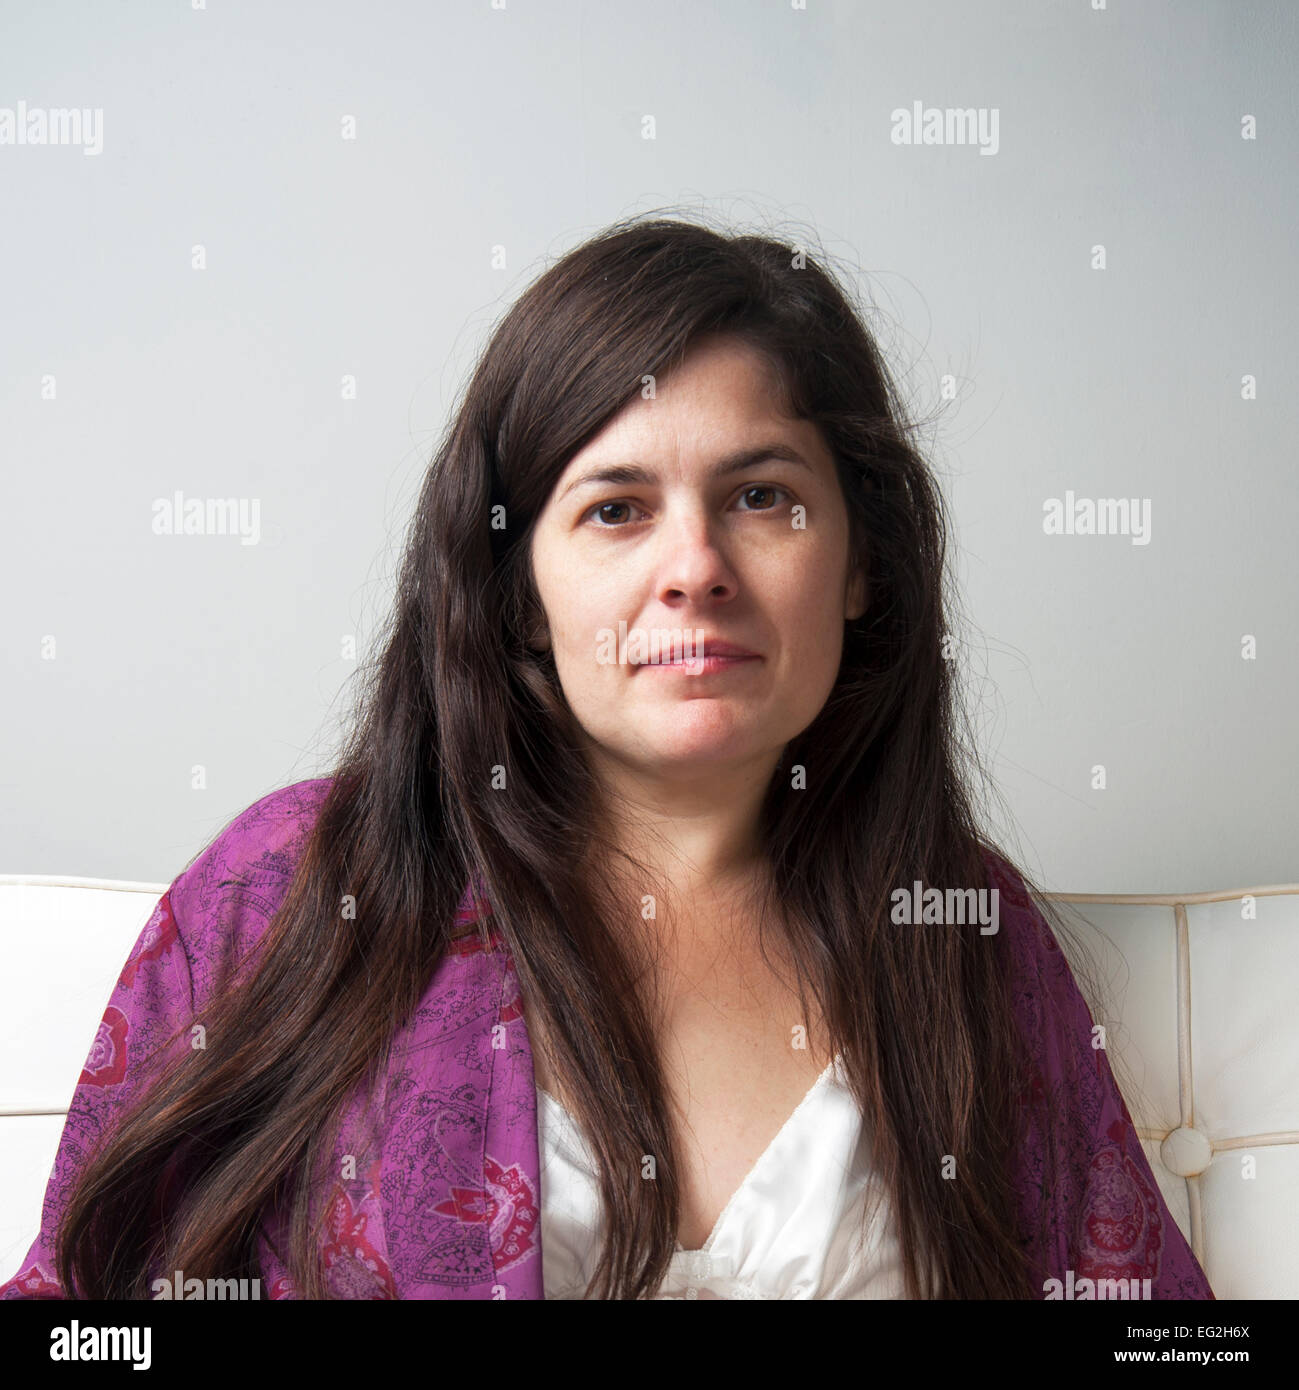 Head and shoulders portrait of woman with long brown hair looking at camera wearing nightgown and housecoat Stock Photo